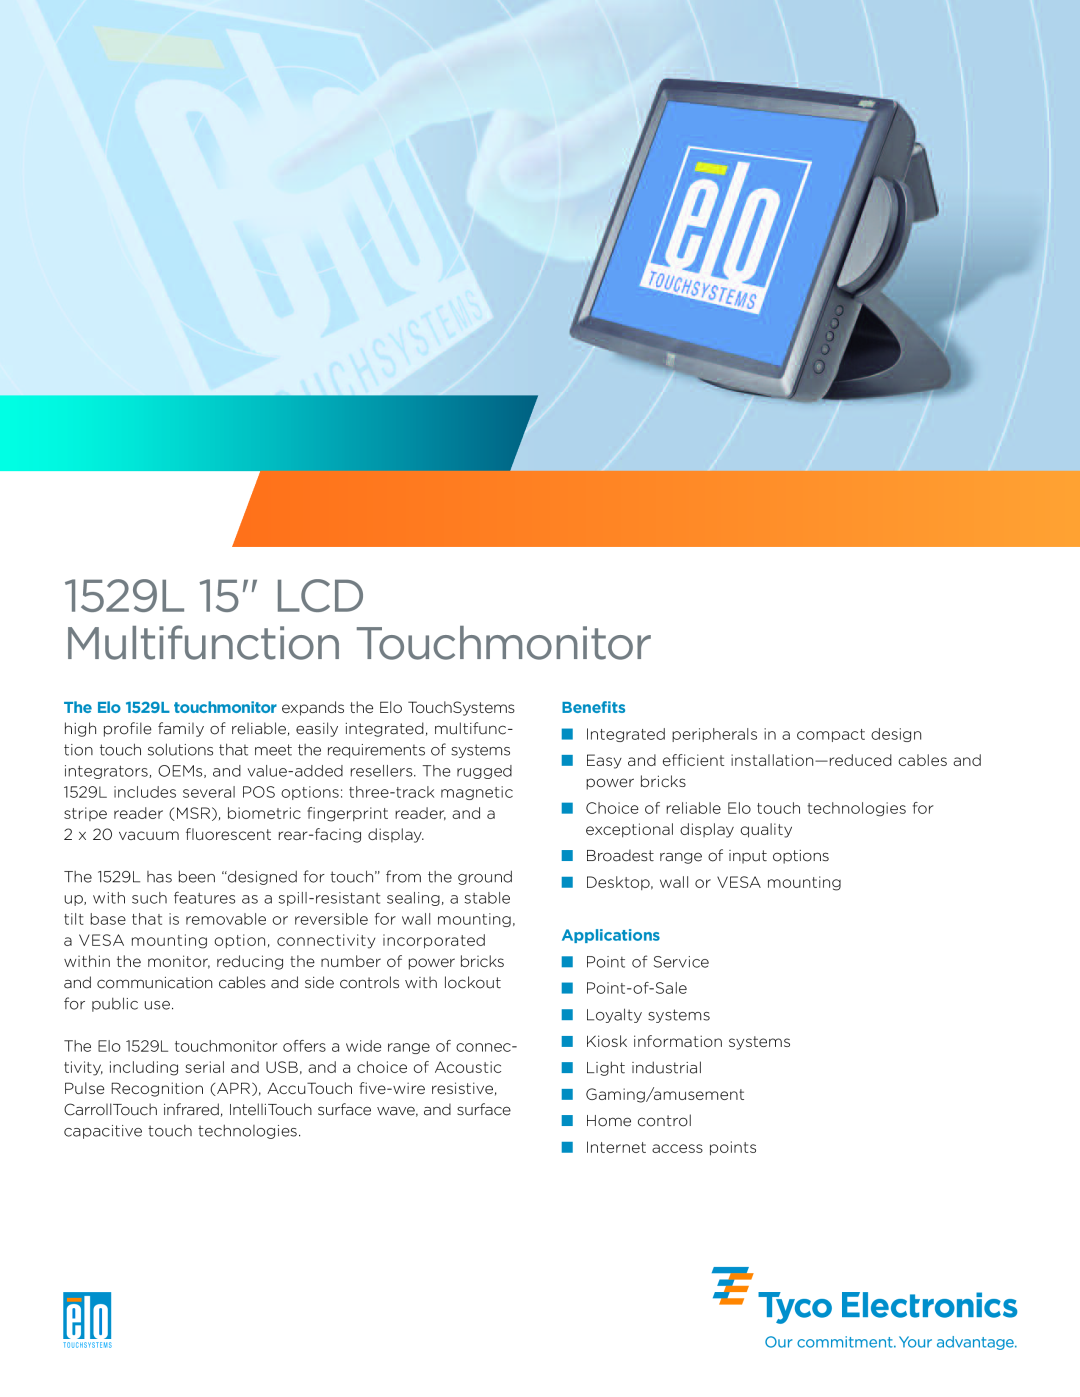 Elo TouchSystems 15298L manual Benefits, Applications, 1529L 15 LCD MultifunctionTouchmonitor 